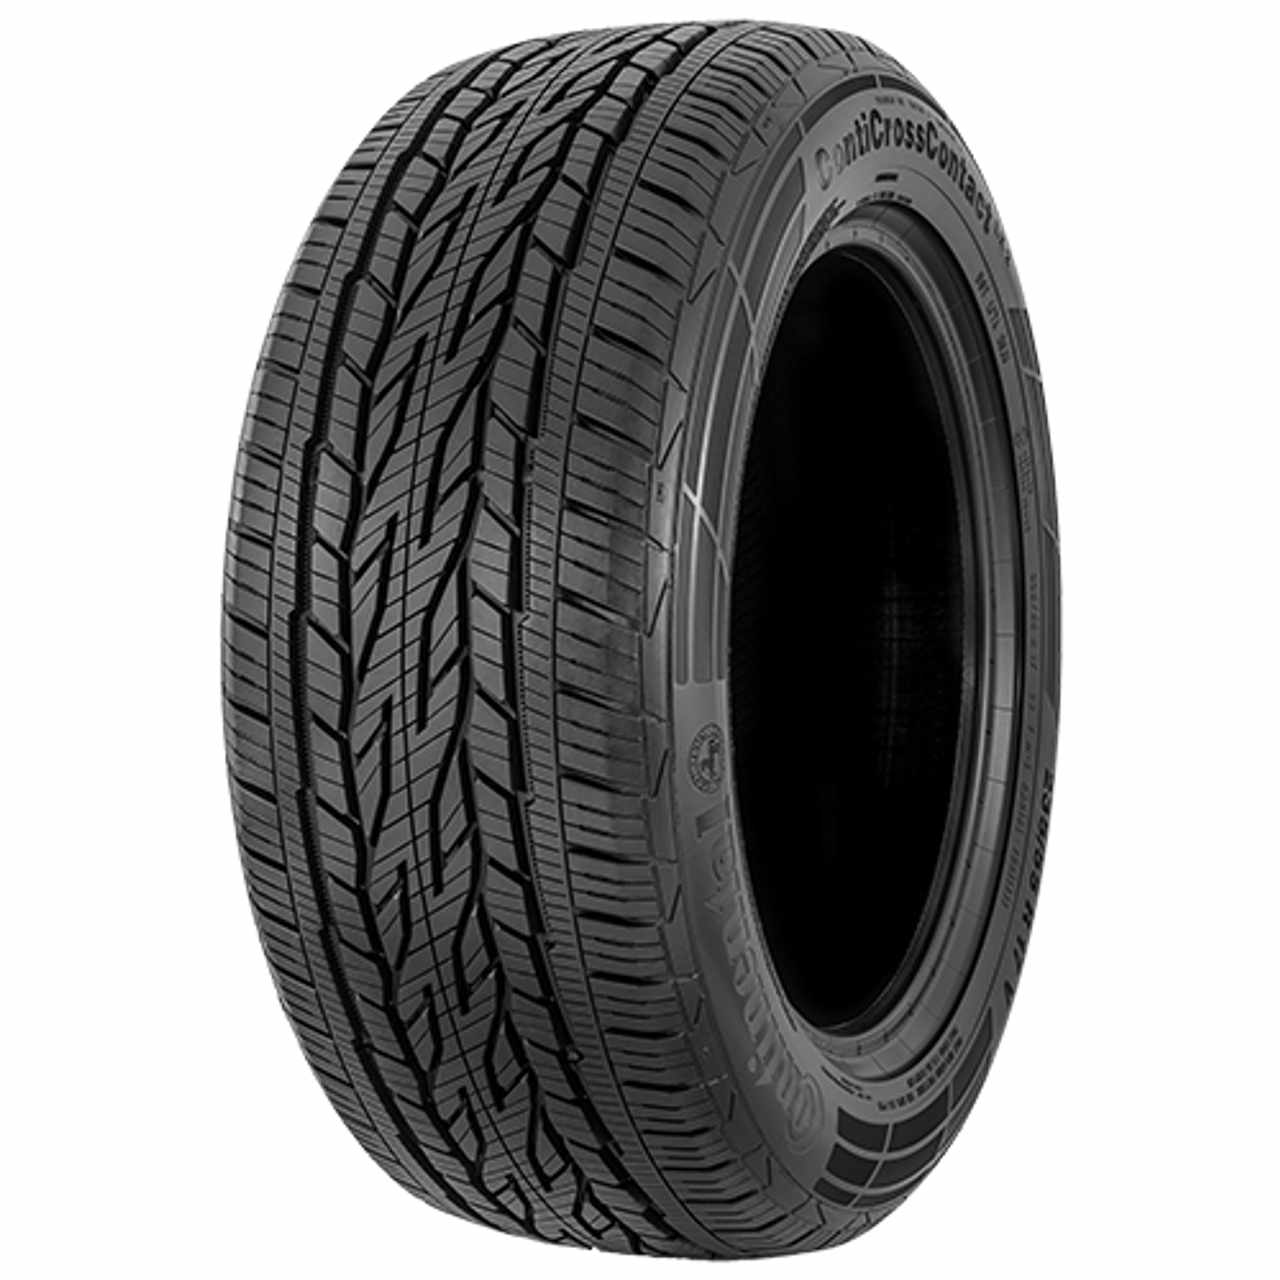 CONTINENTAL CONTICROSSCONTACT LX 2 (EVc) 255/70R16 111T FR BSW